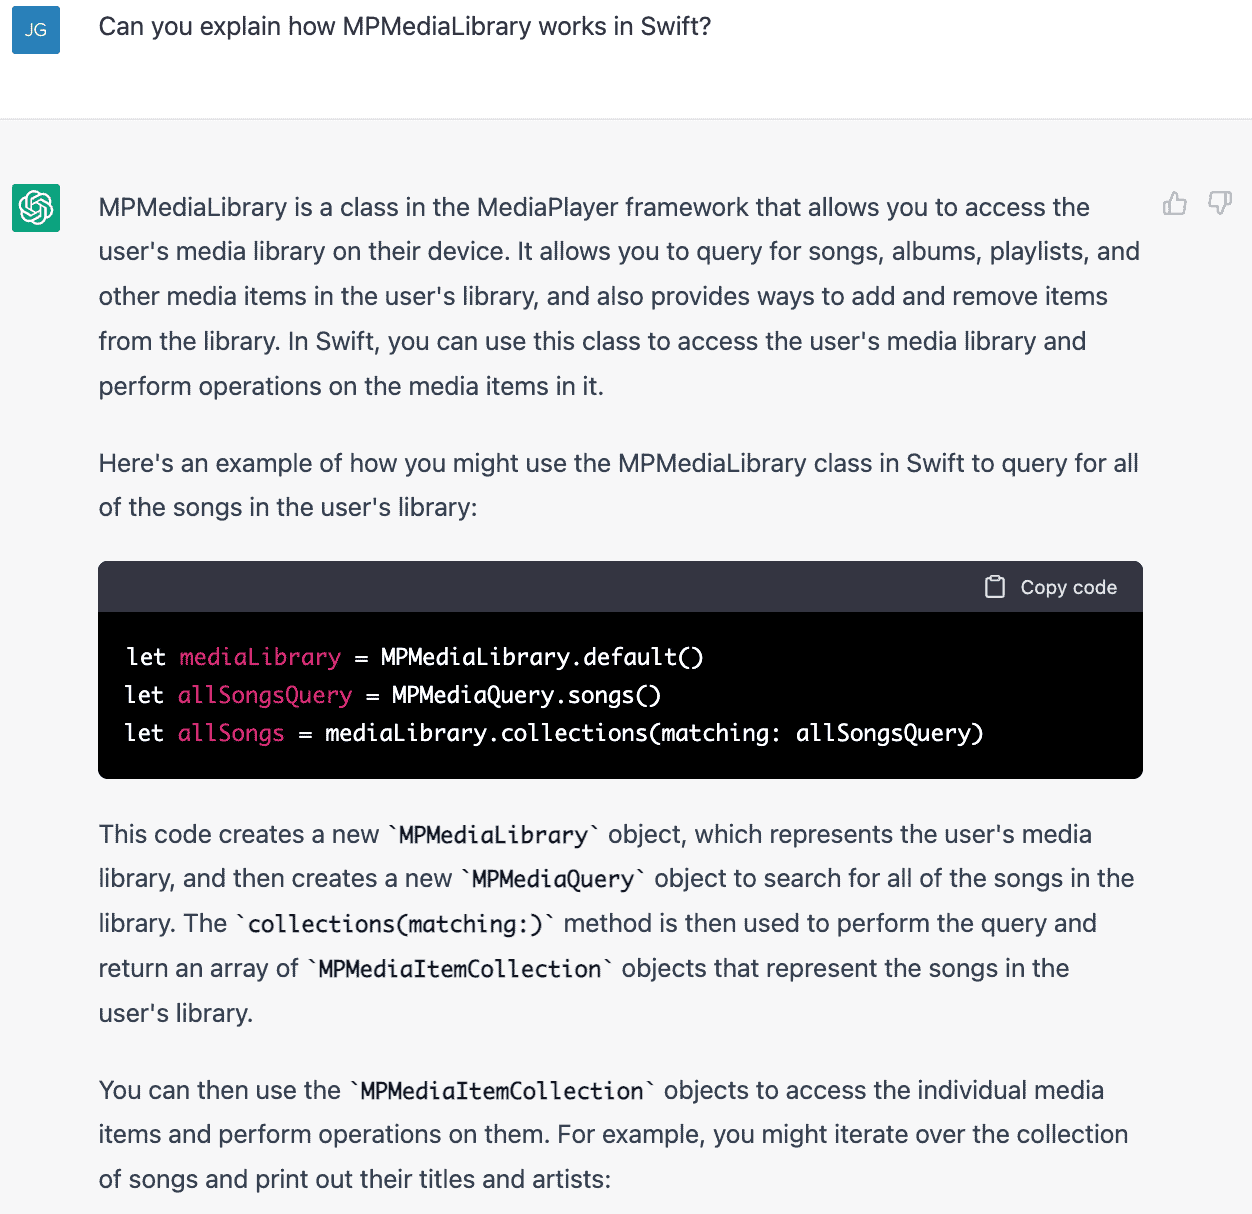 Asking ChatGPT to explain how the MPMediaLibrary class works in the Swift programming language